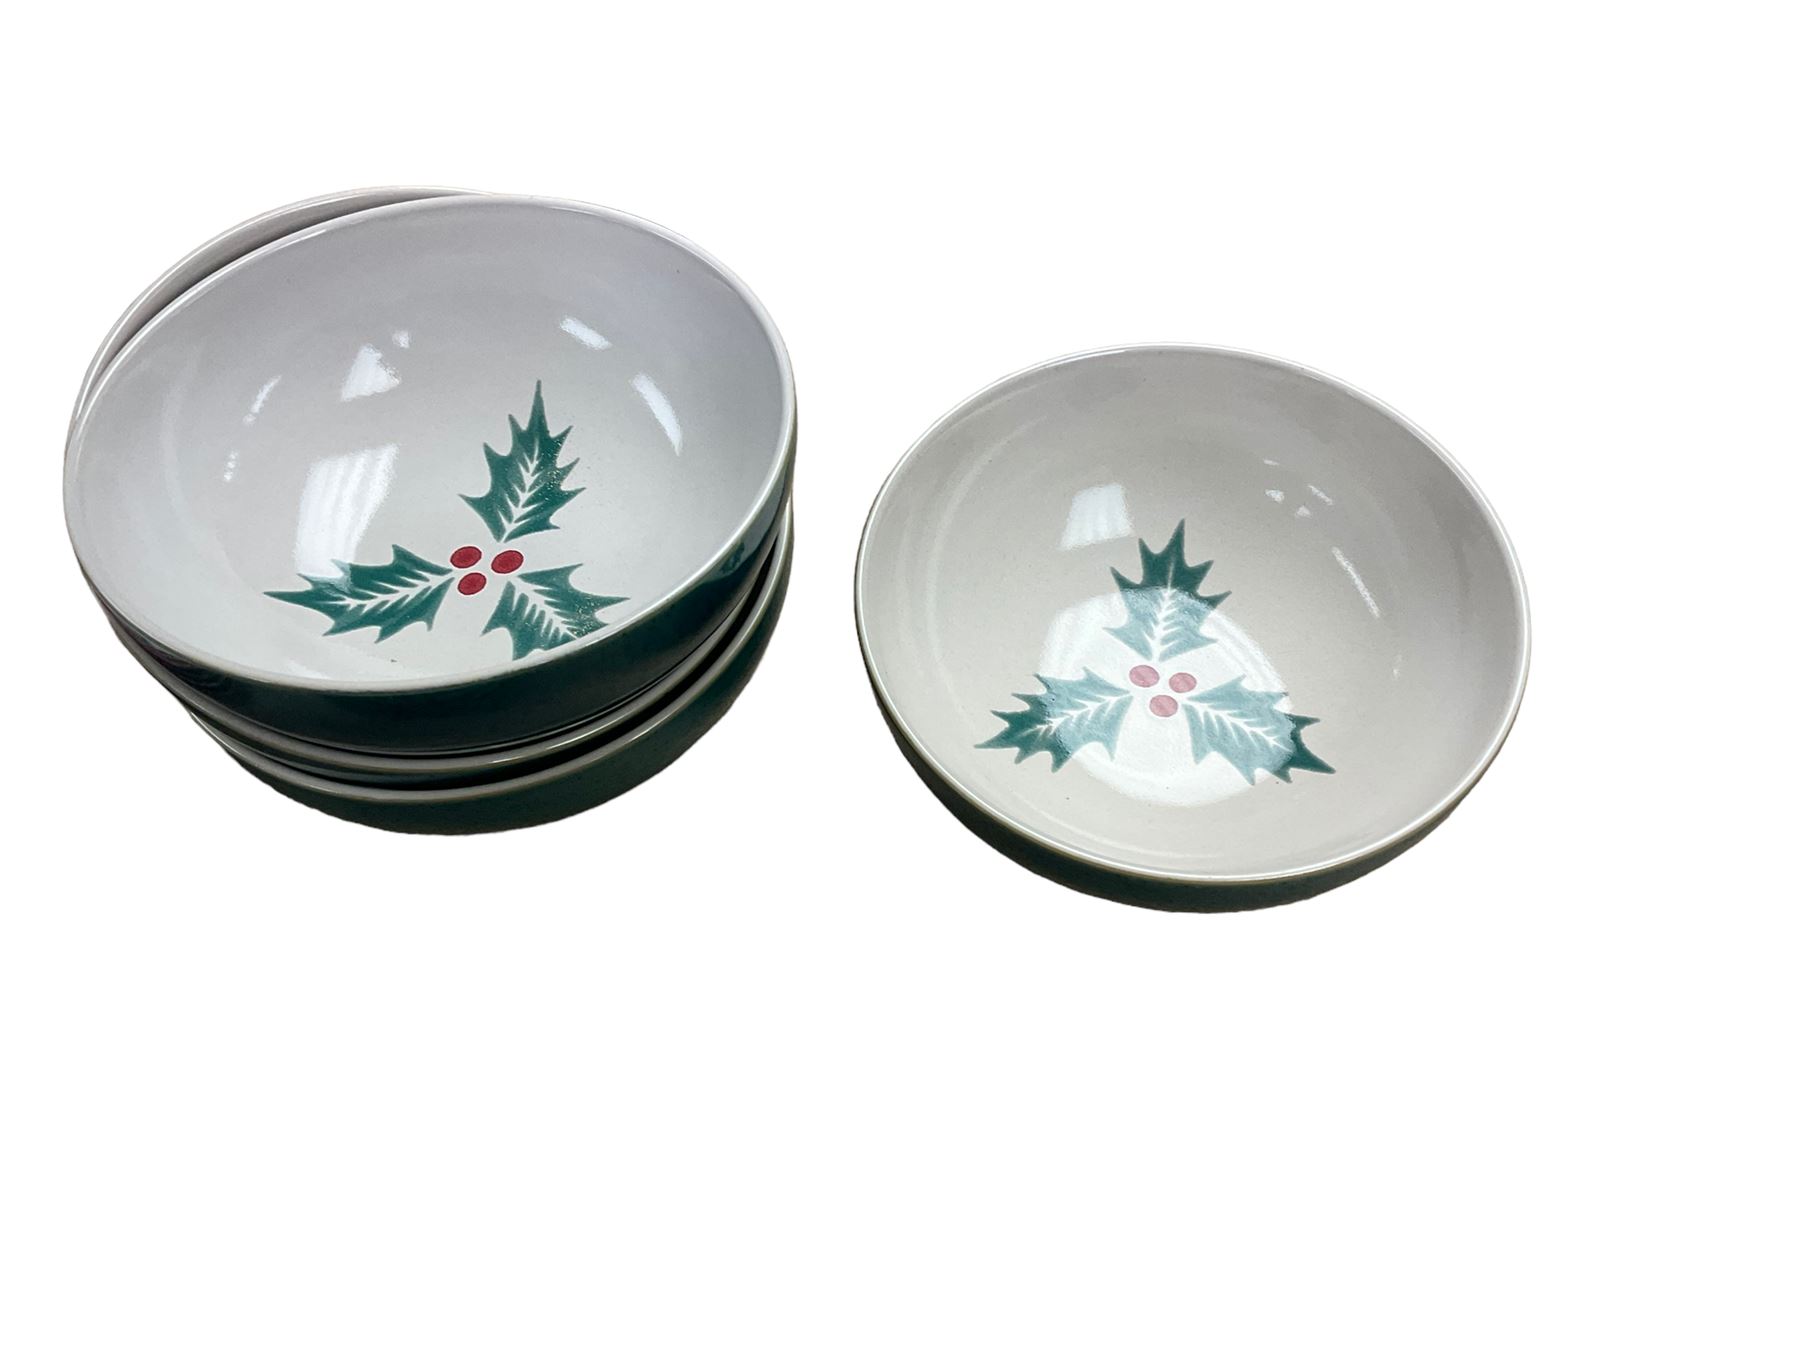 Denby Holly pattern Christmas ceramics - Image 4 of 4